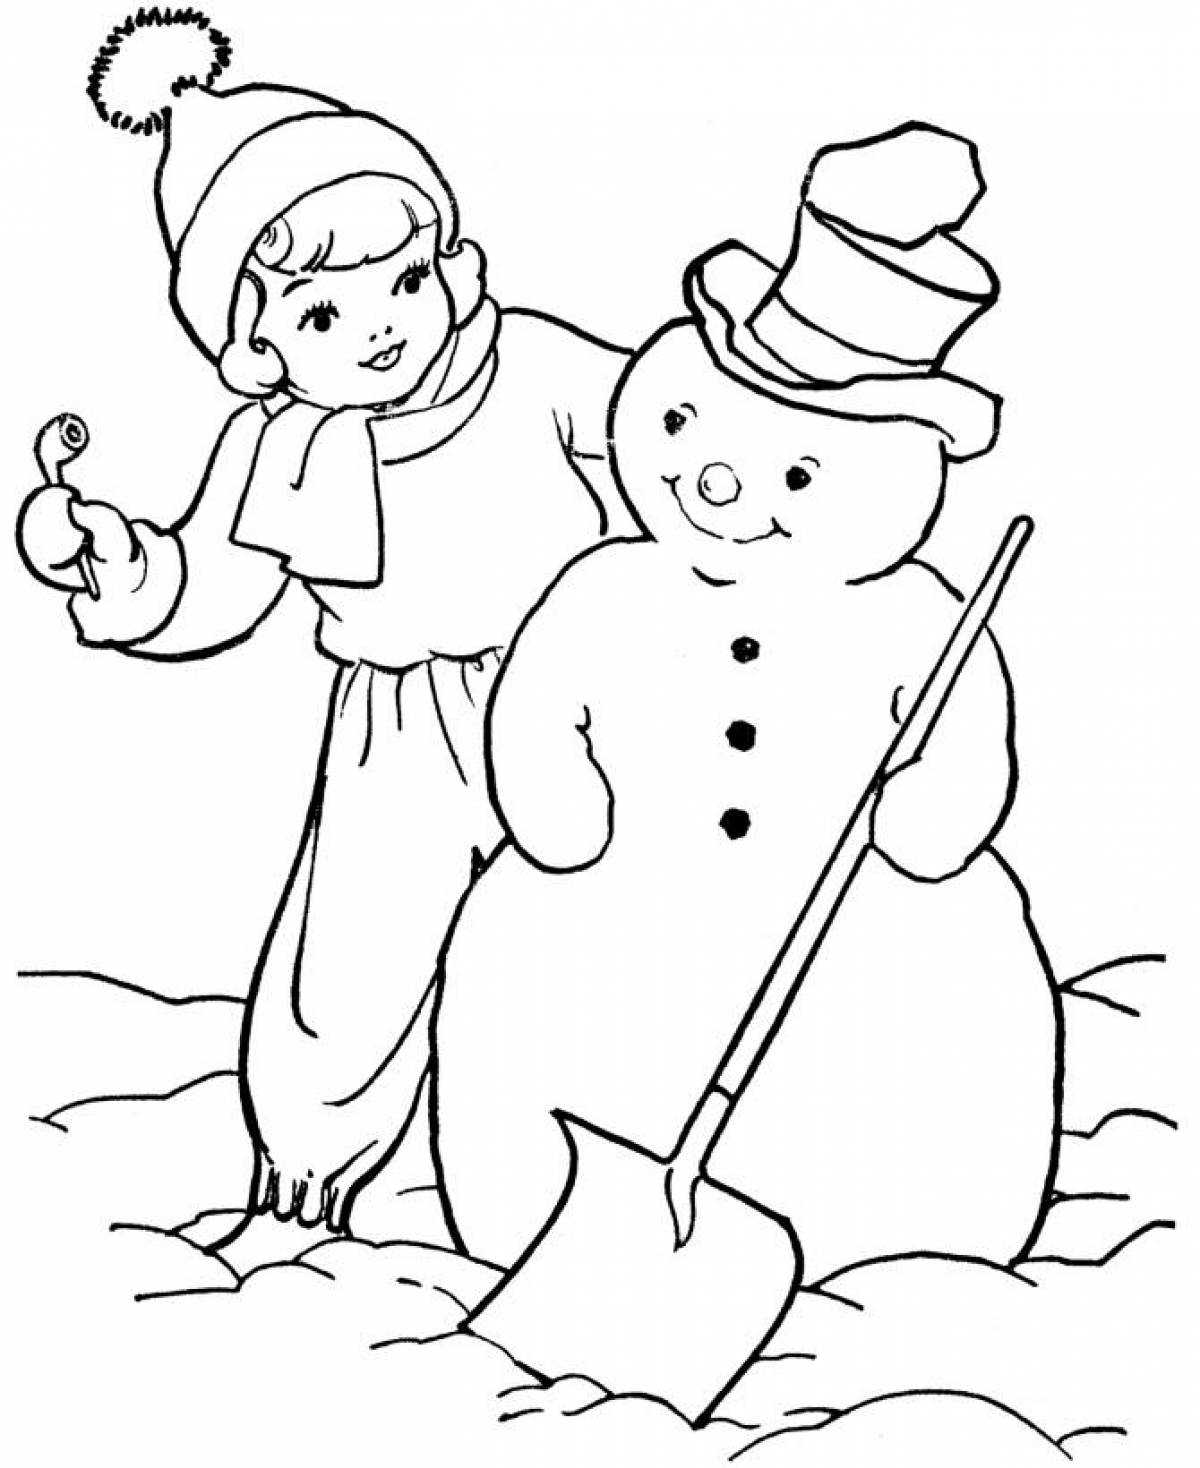 Snowman and girl